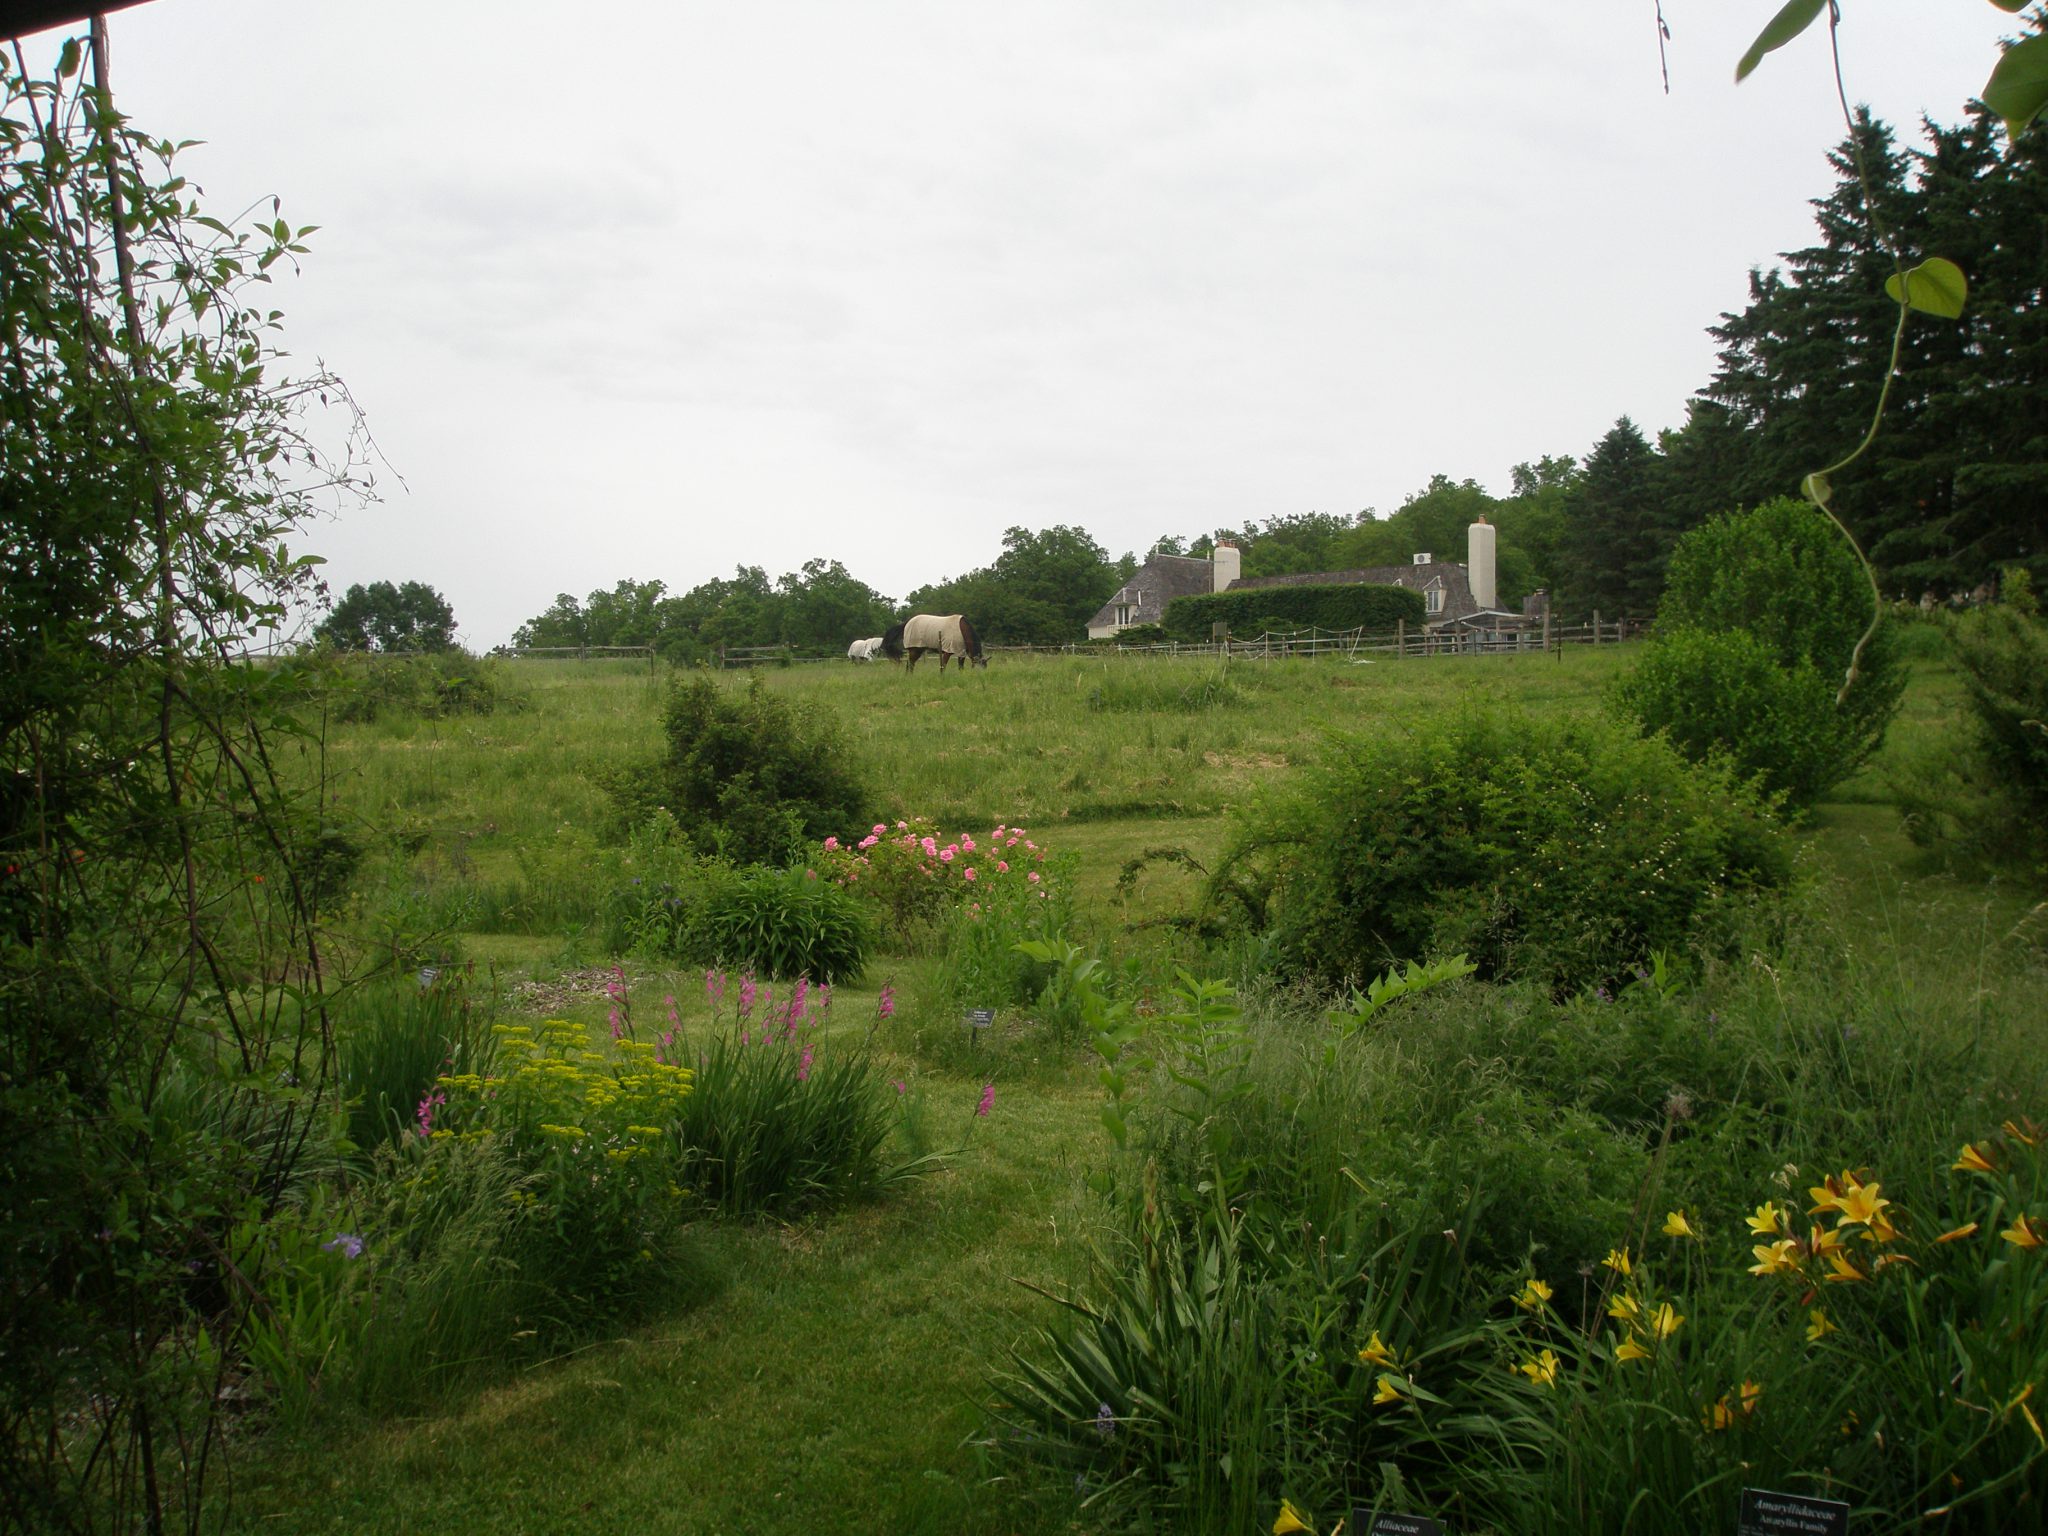 View up toward the Main House, from the Pasture